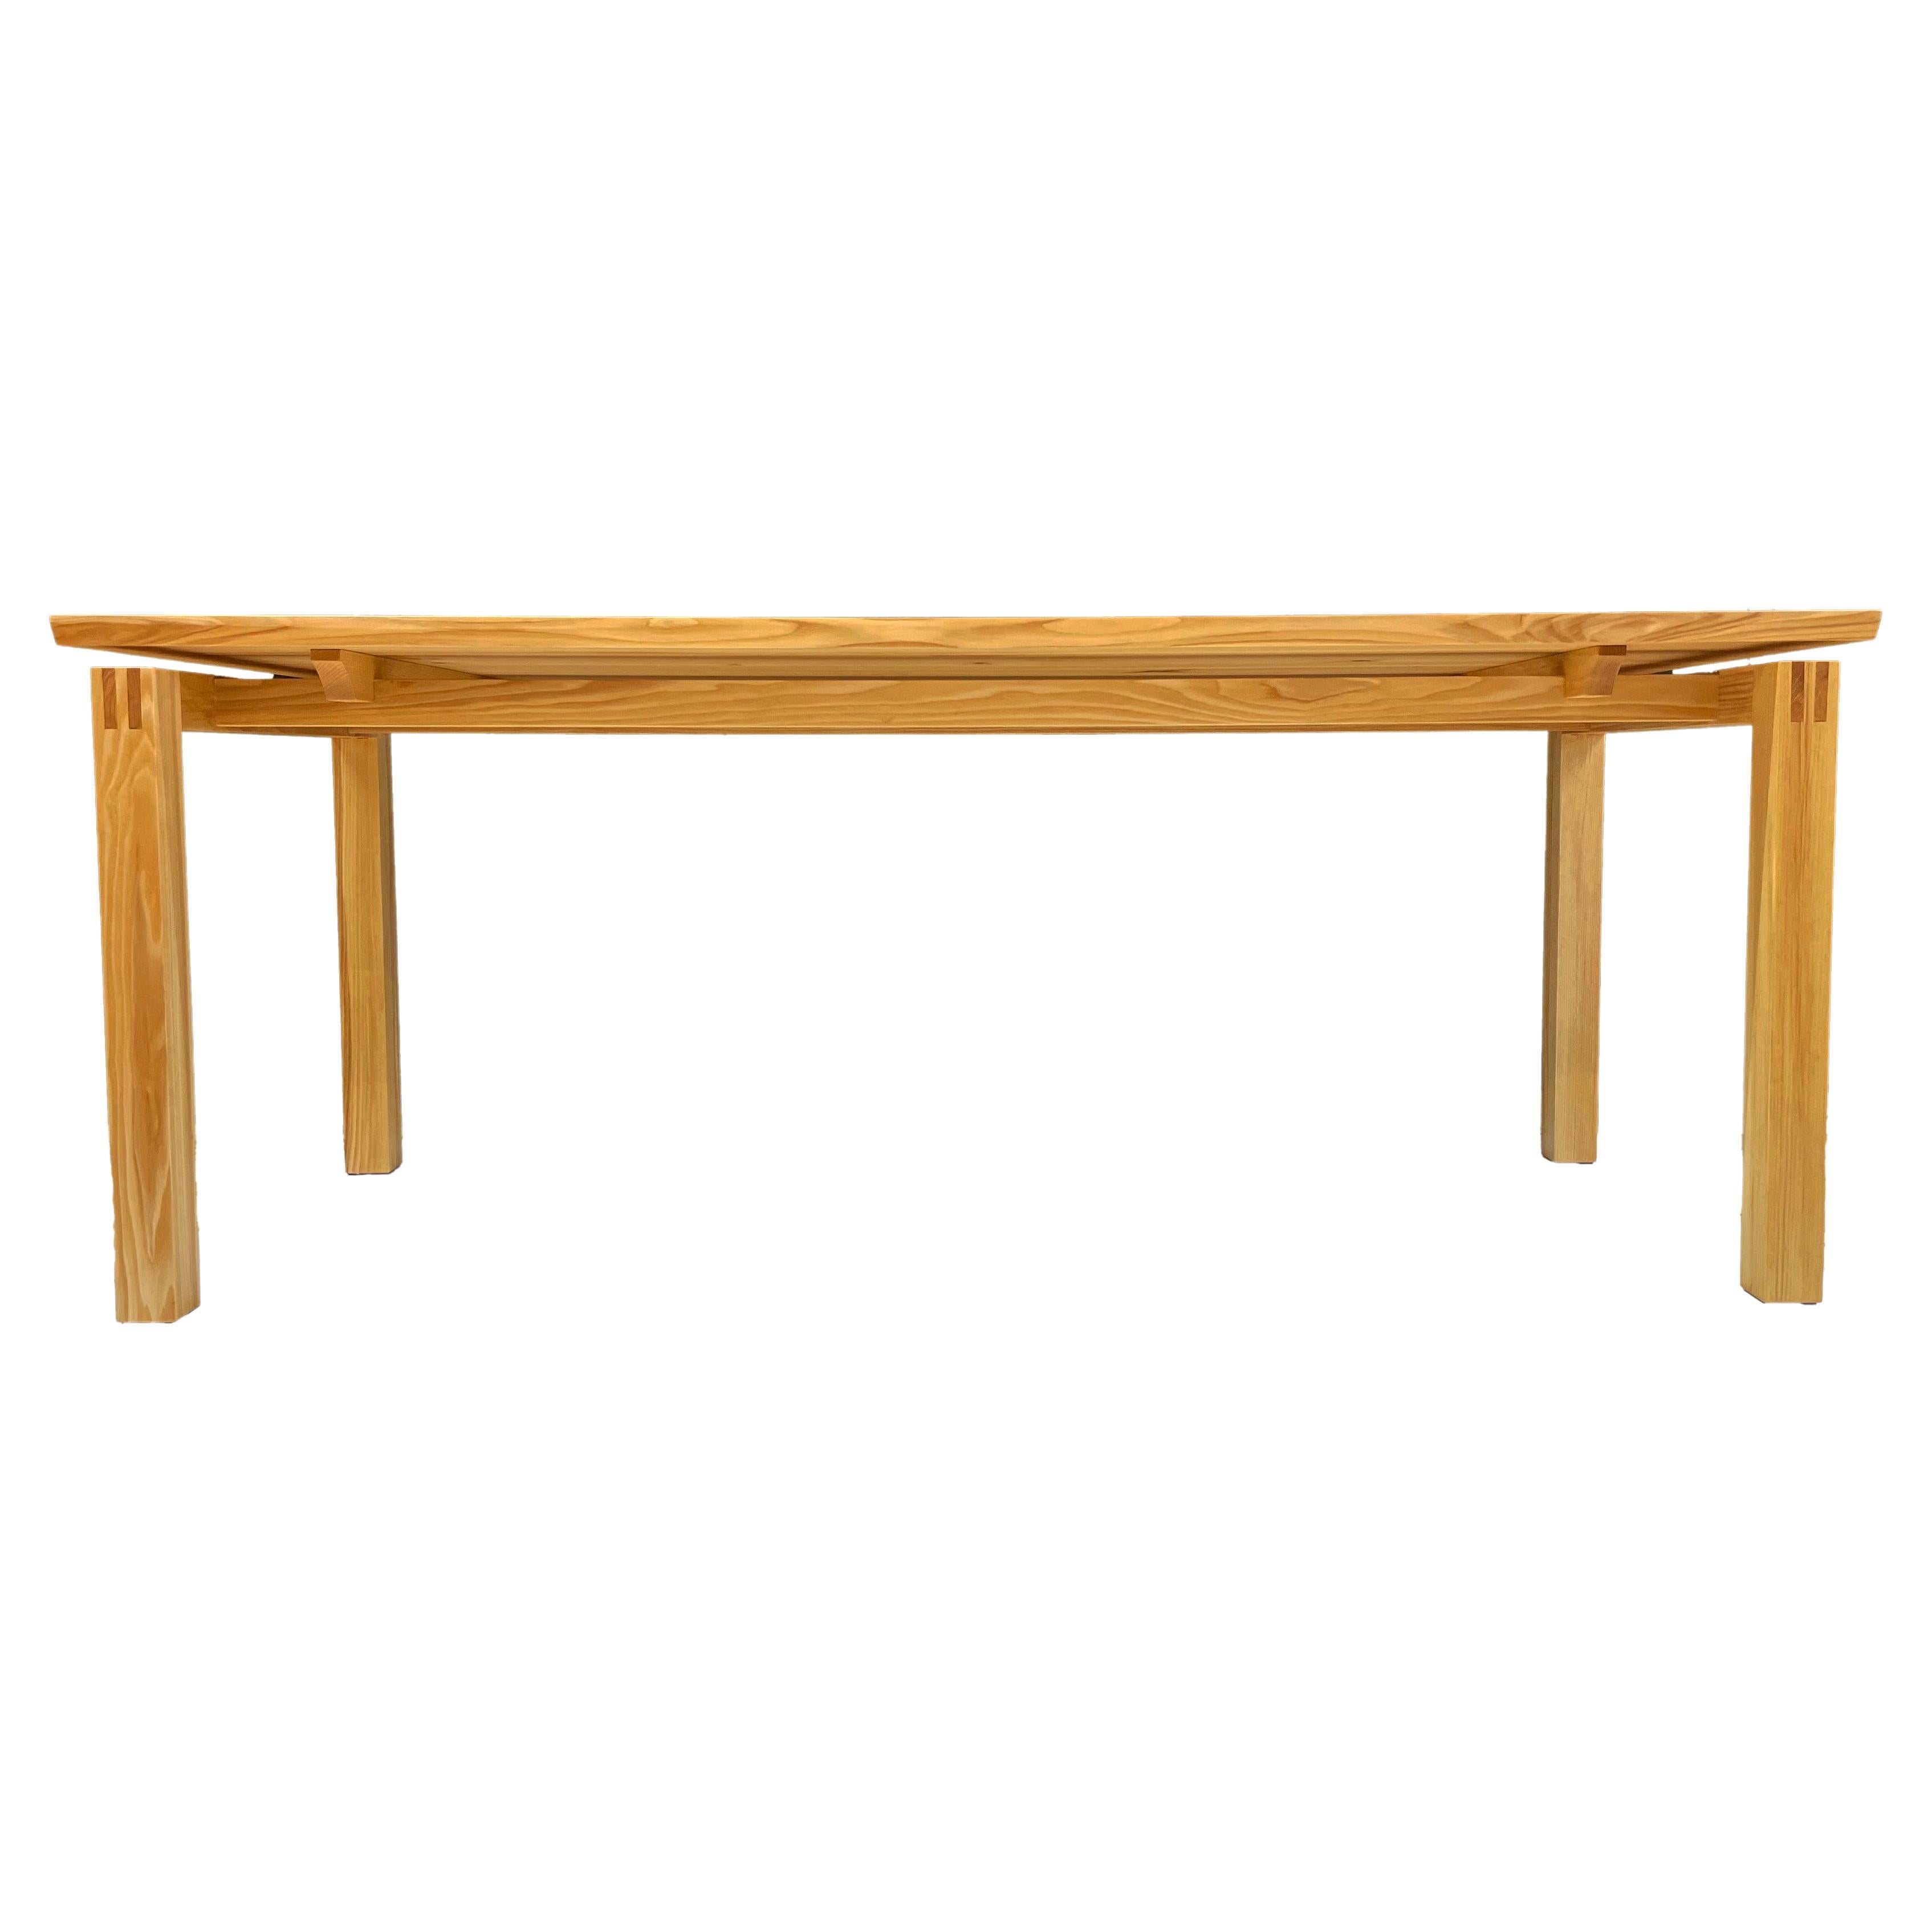 Modern and solid dining table